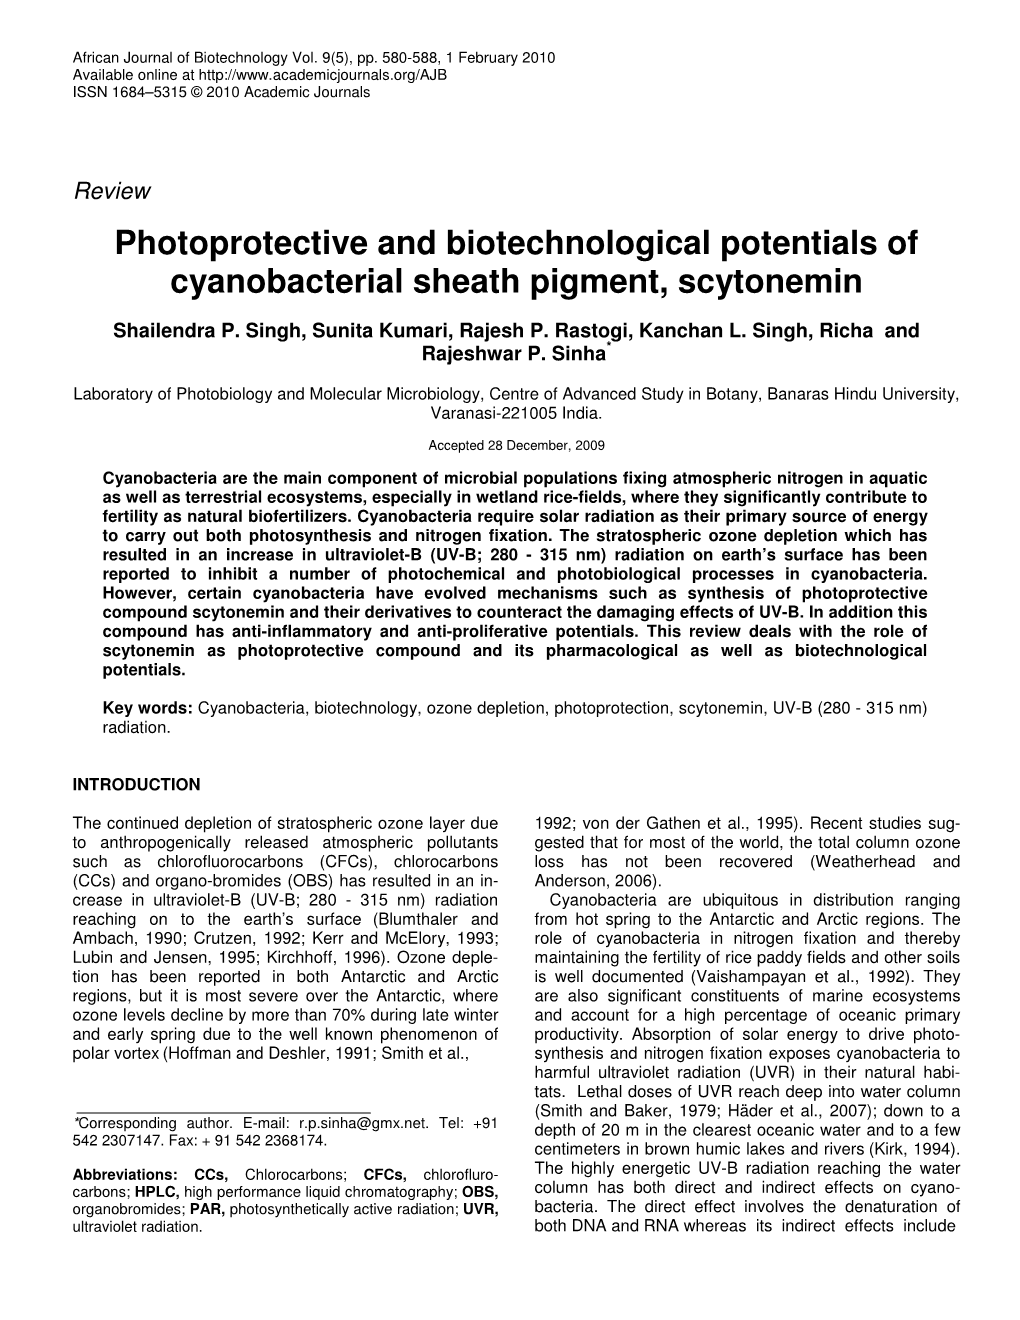 Photoprotective and Biotechnological Potentials of Cyanobacterial Sheath Pigment, Scytonemin